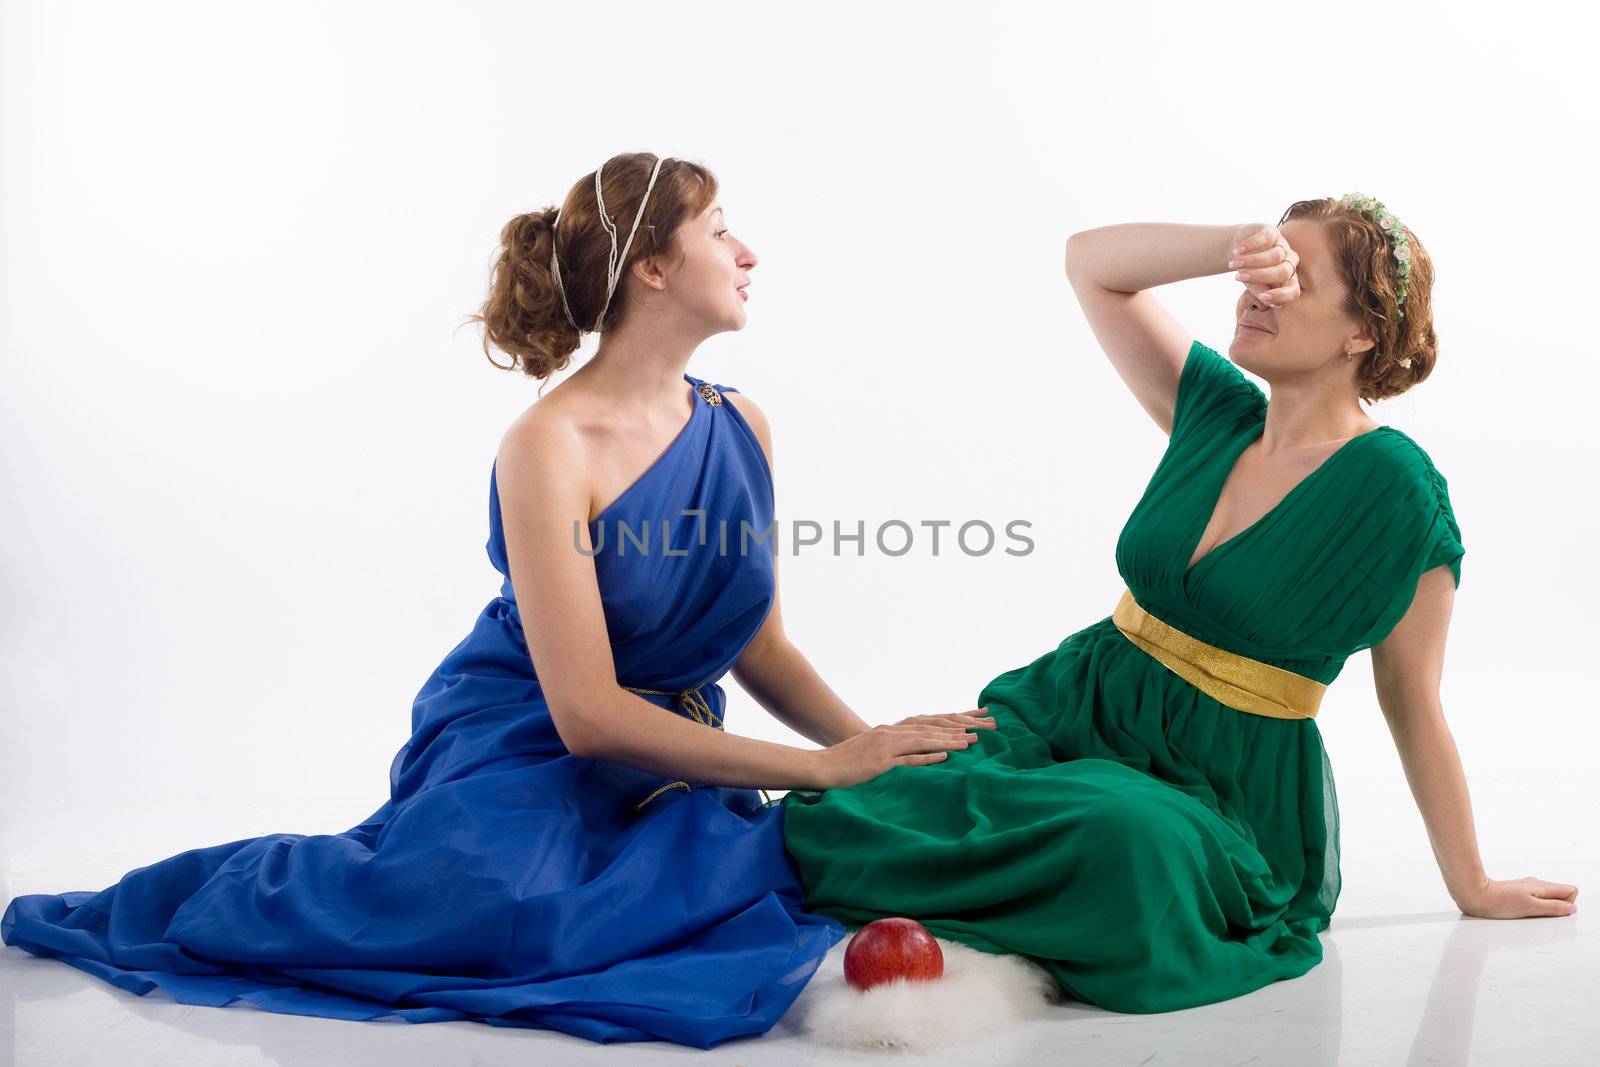 Two ladies in antique dress and apple on white background
